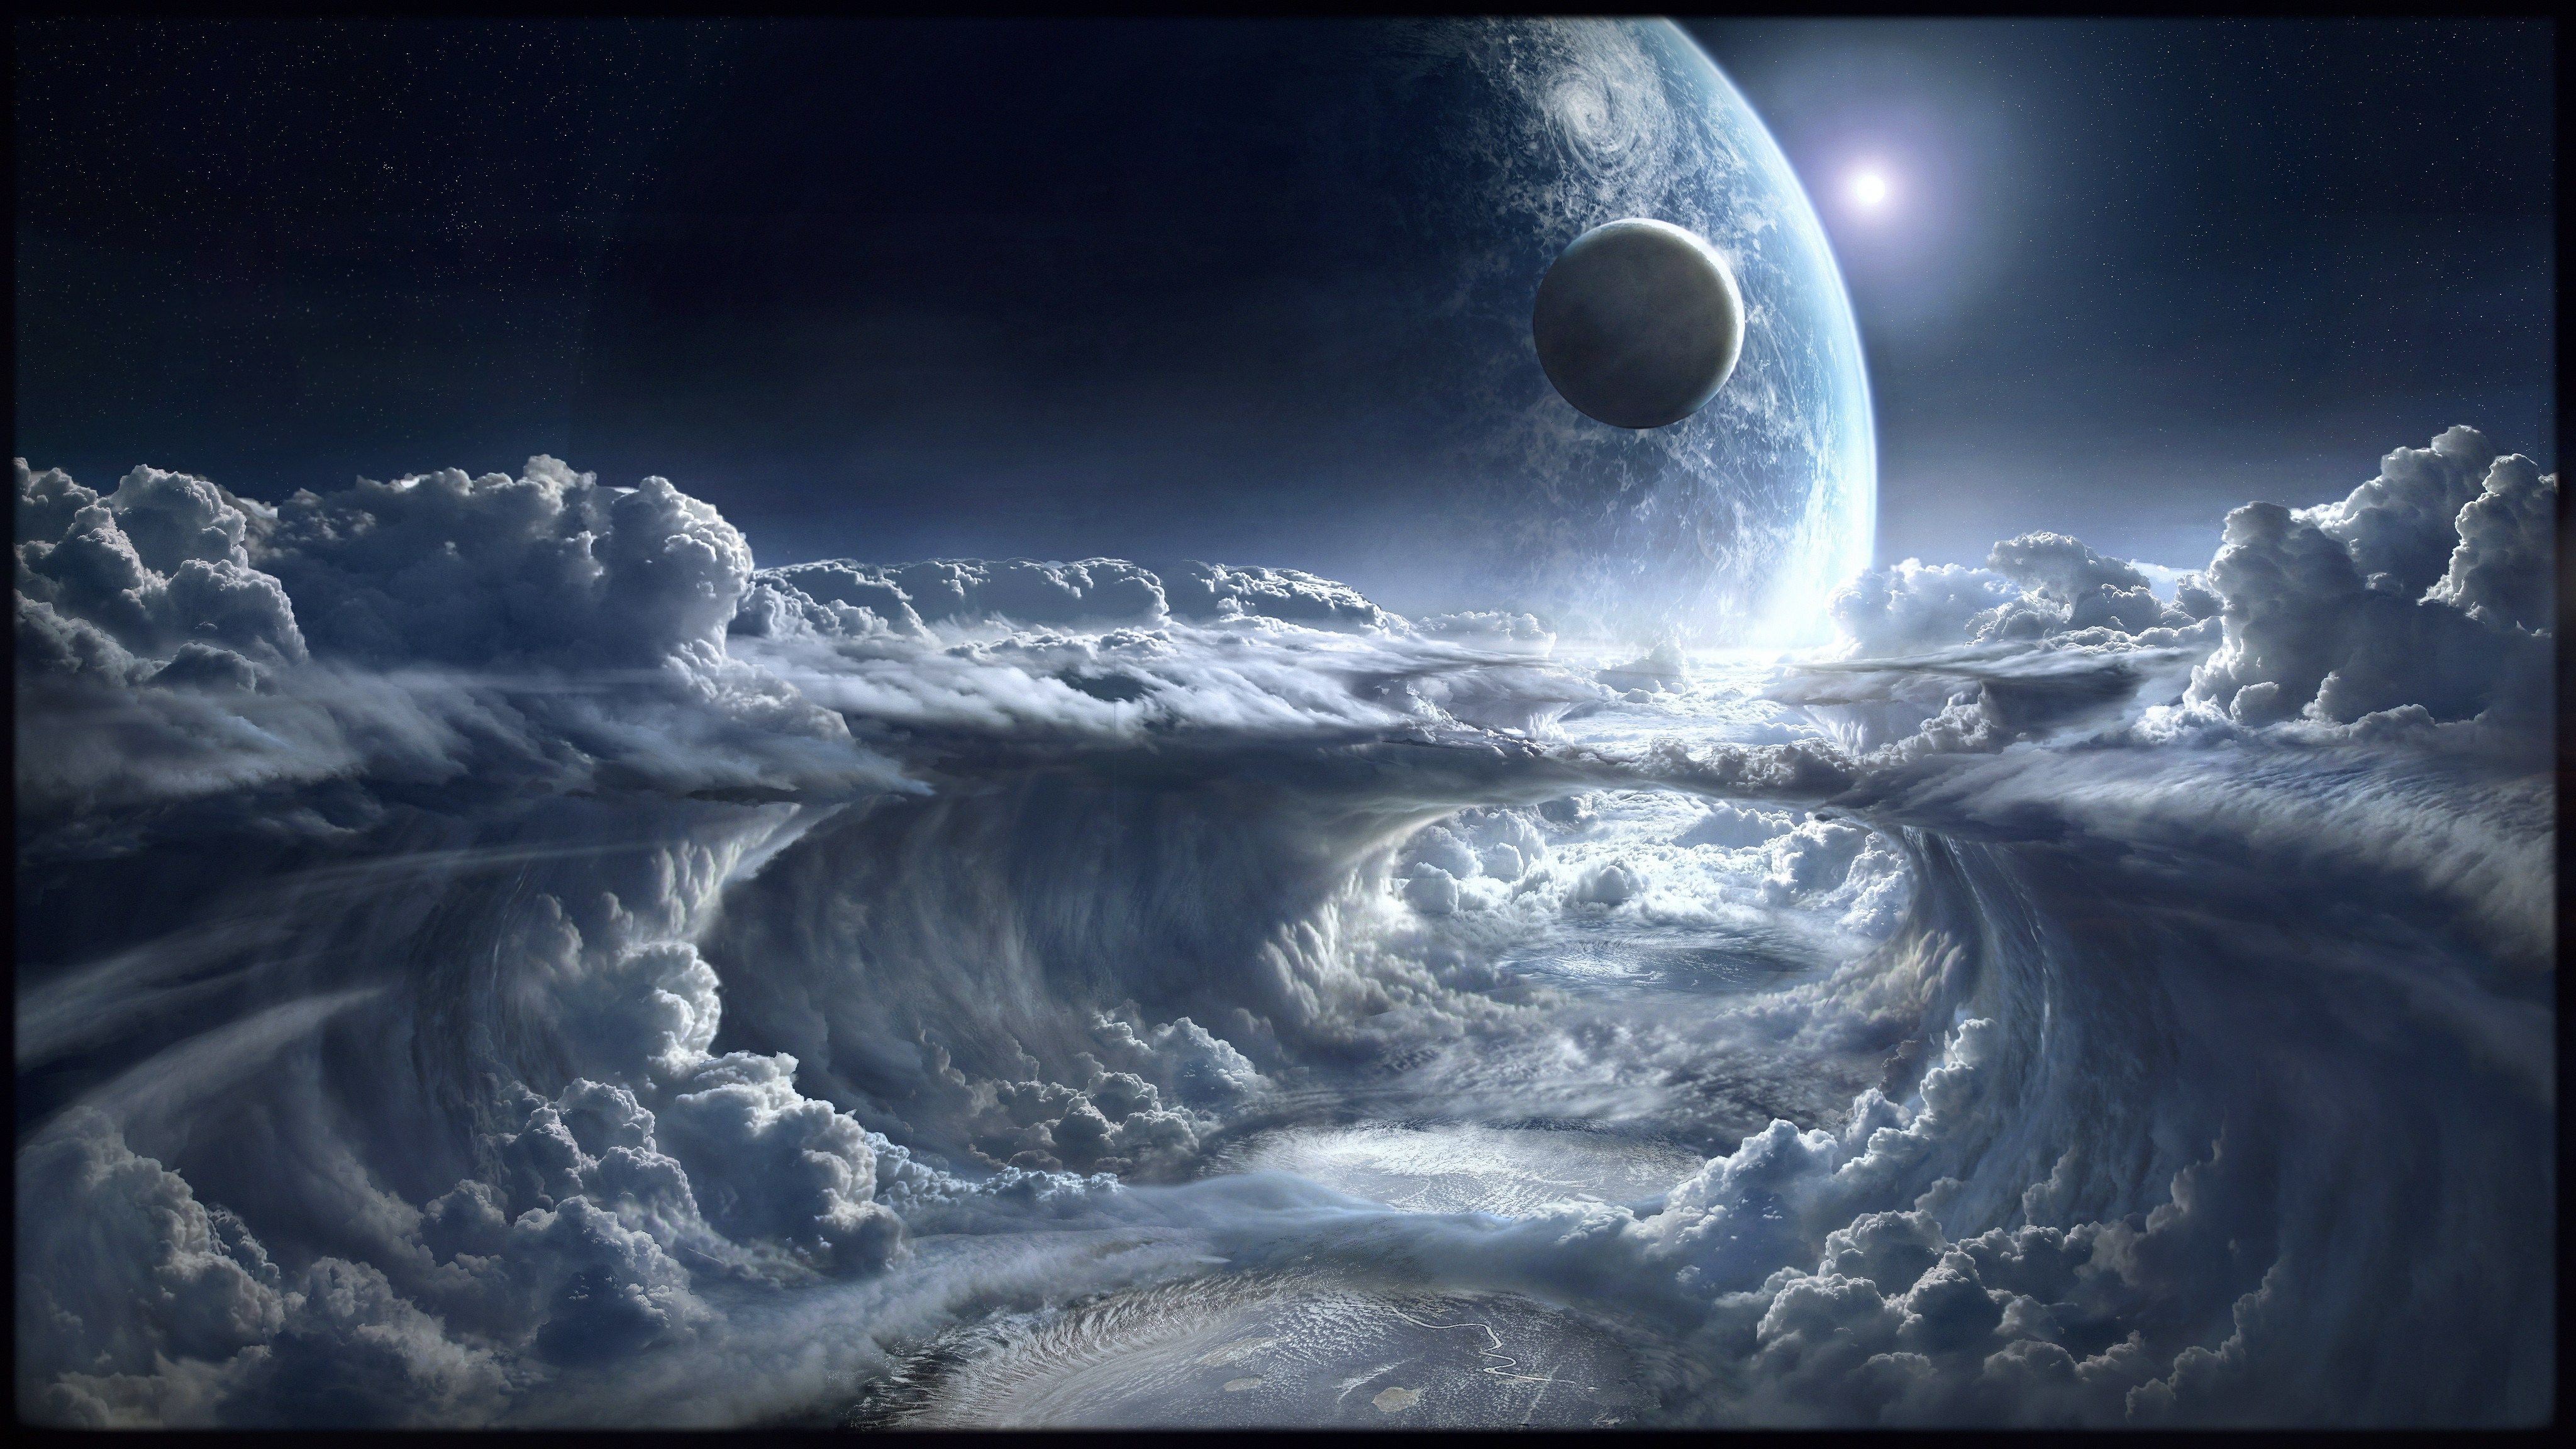 Awesome Extraterrestrial Sky Scenery Wallpaperx2304